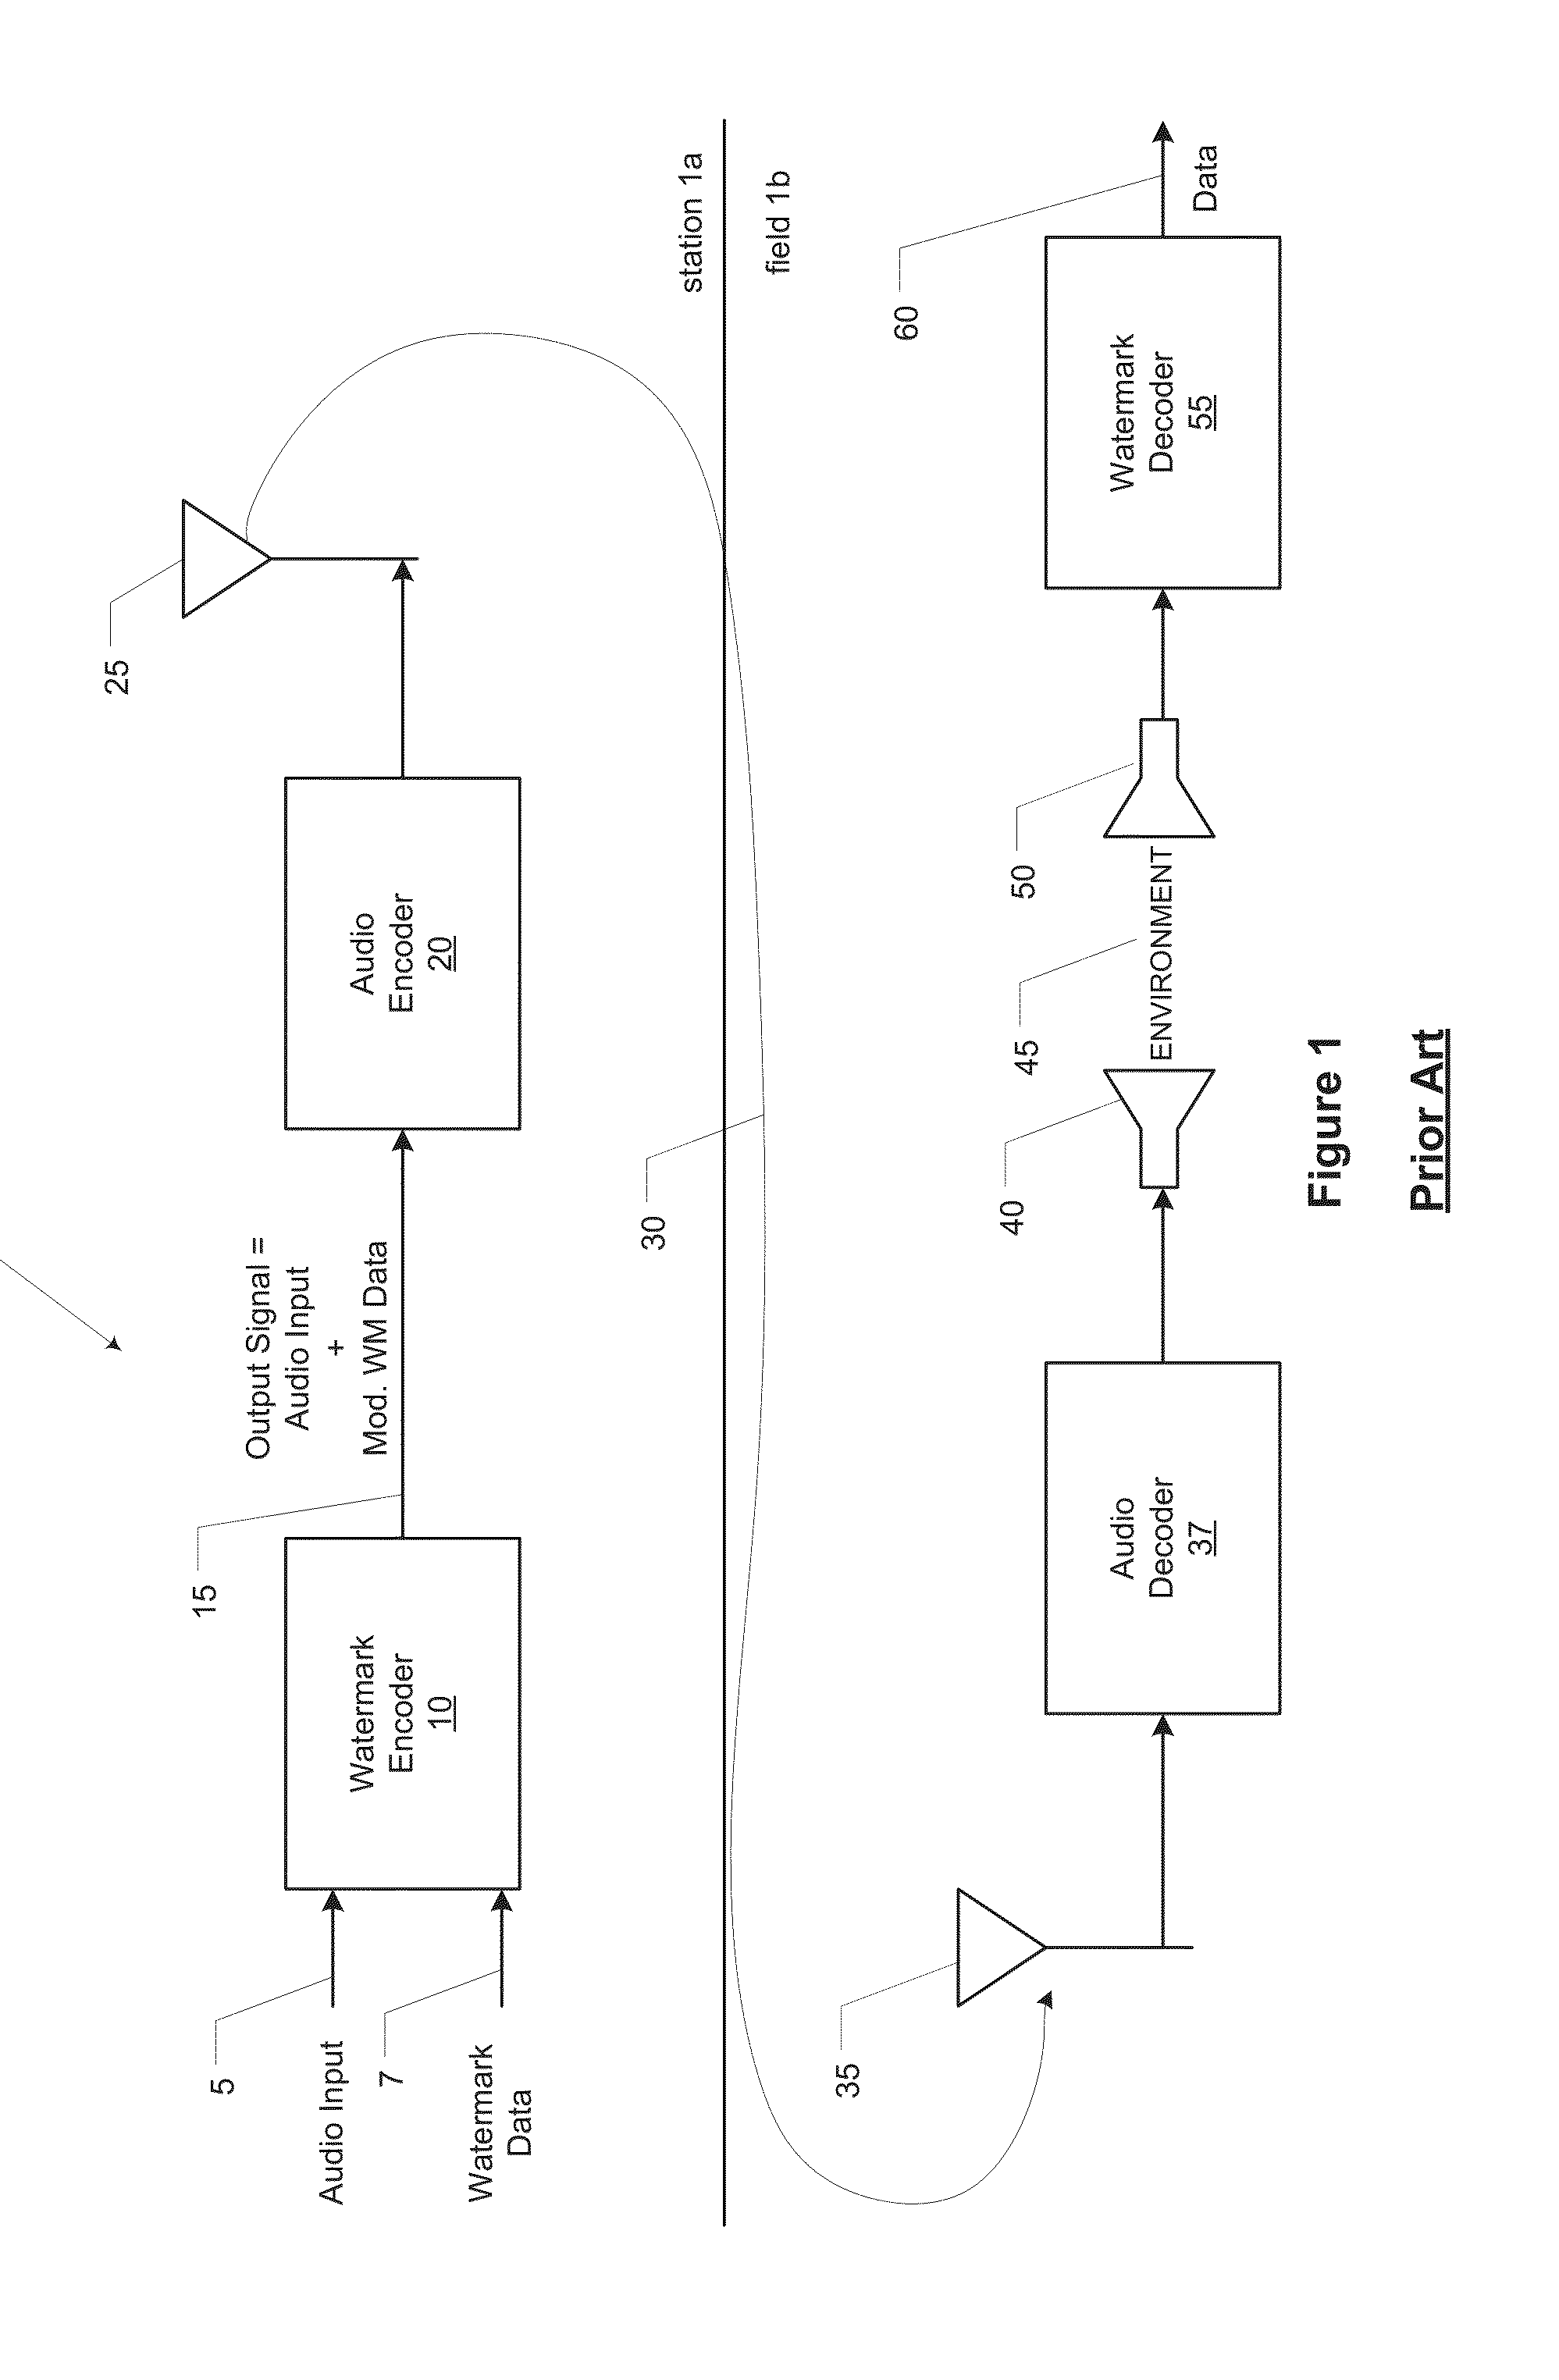 Data carriage in encoded and pre-encoded audio bitstreams